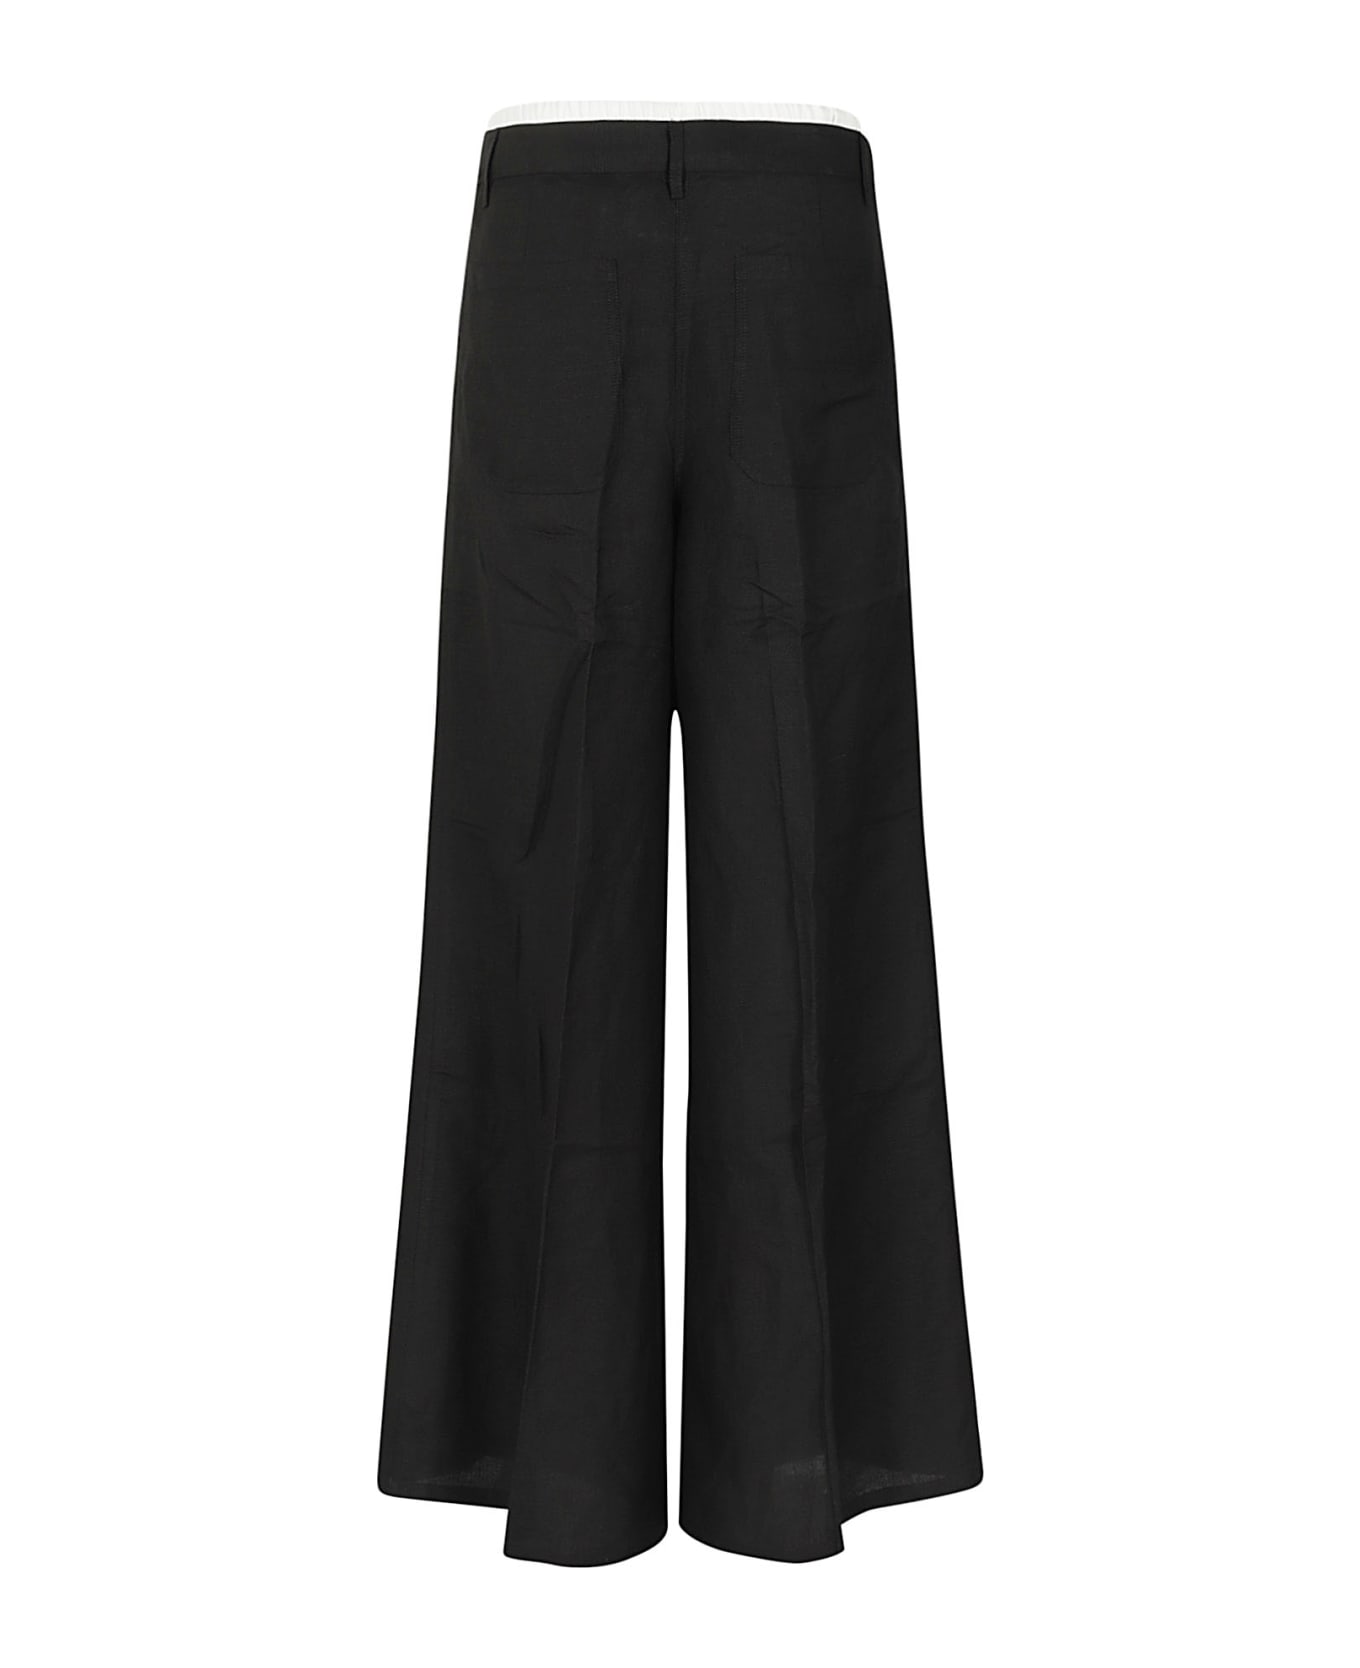 REMAIN Birger Christensen Wide Suiting Pants - Black  ボトムス